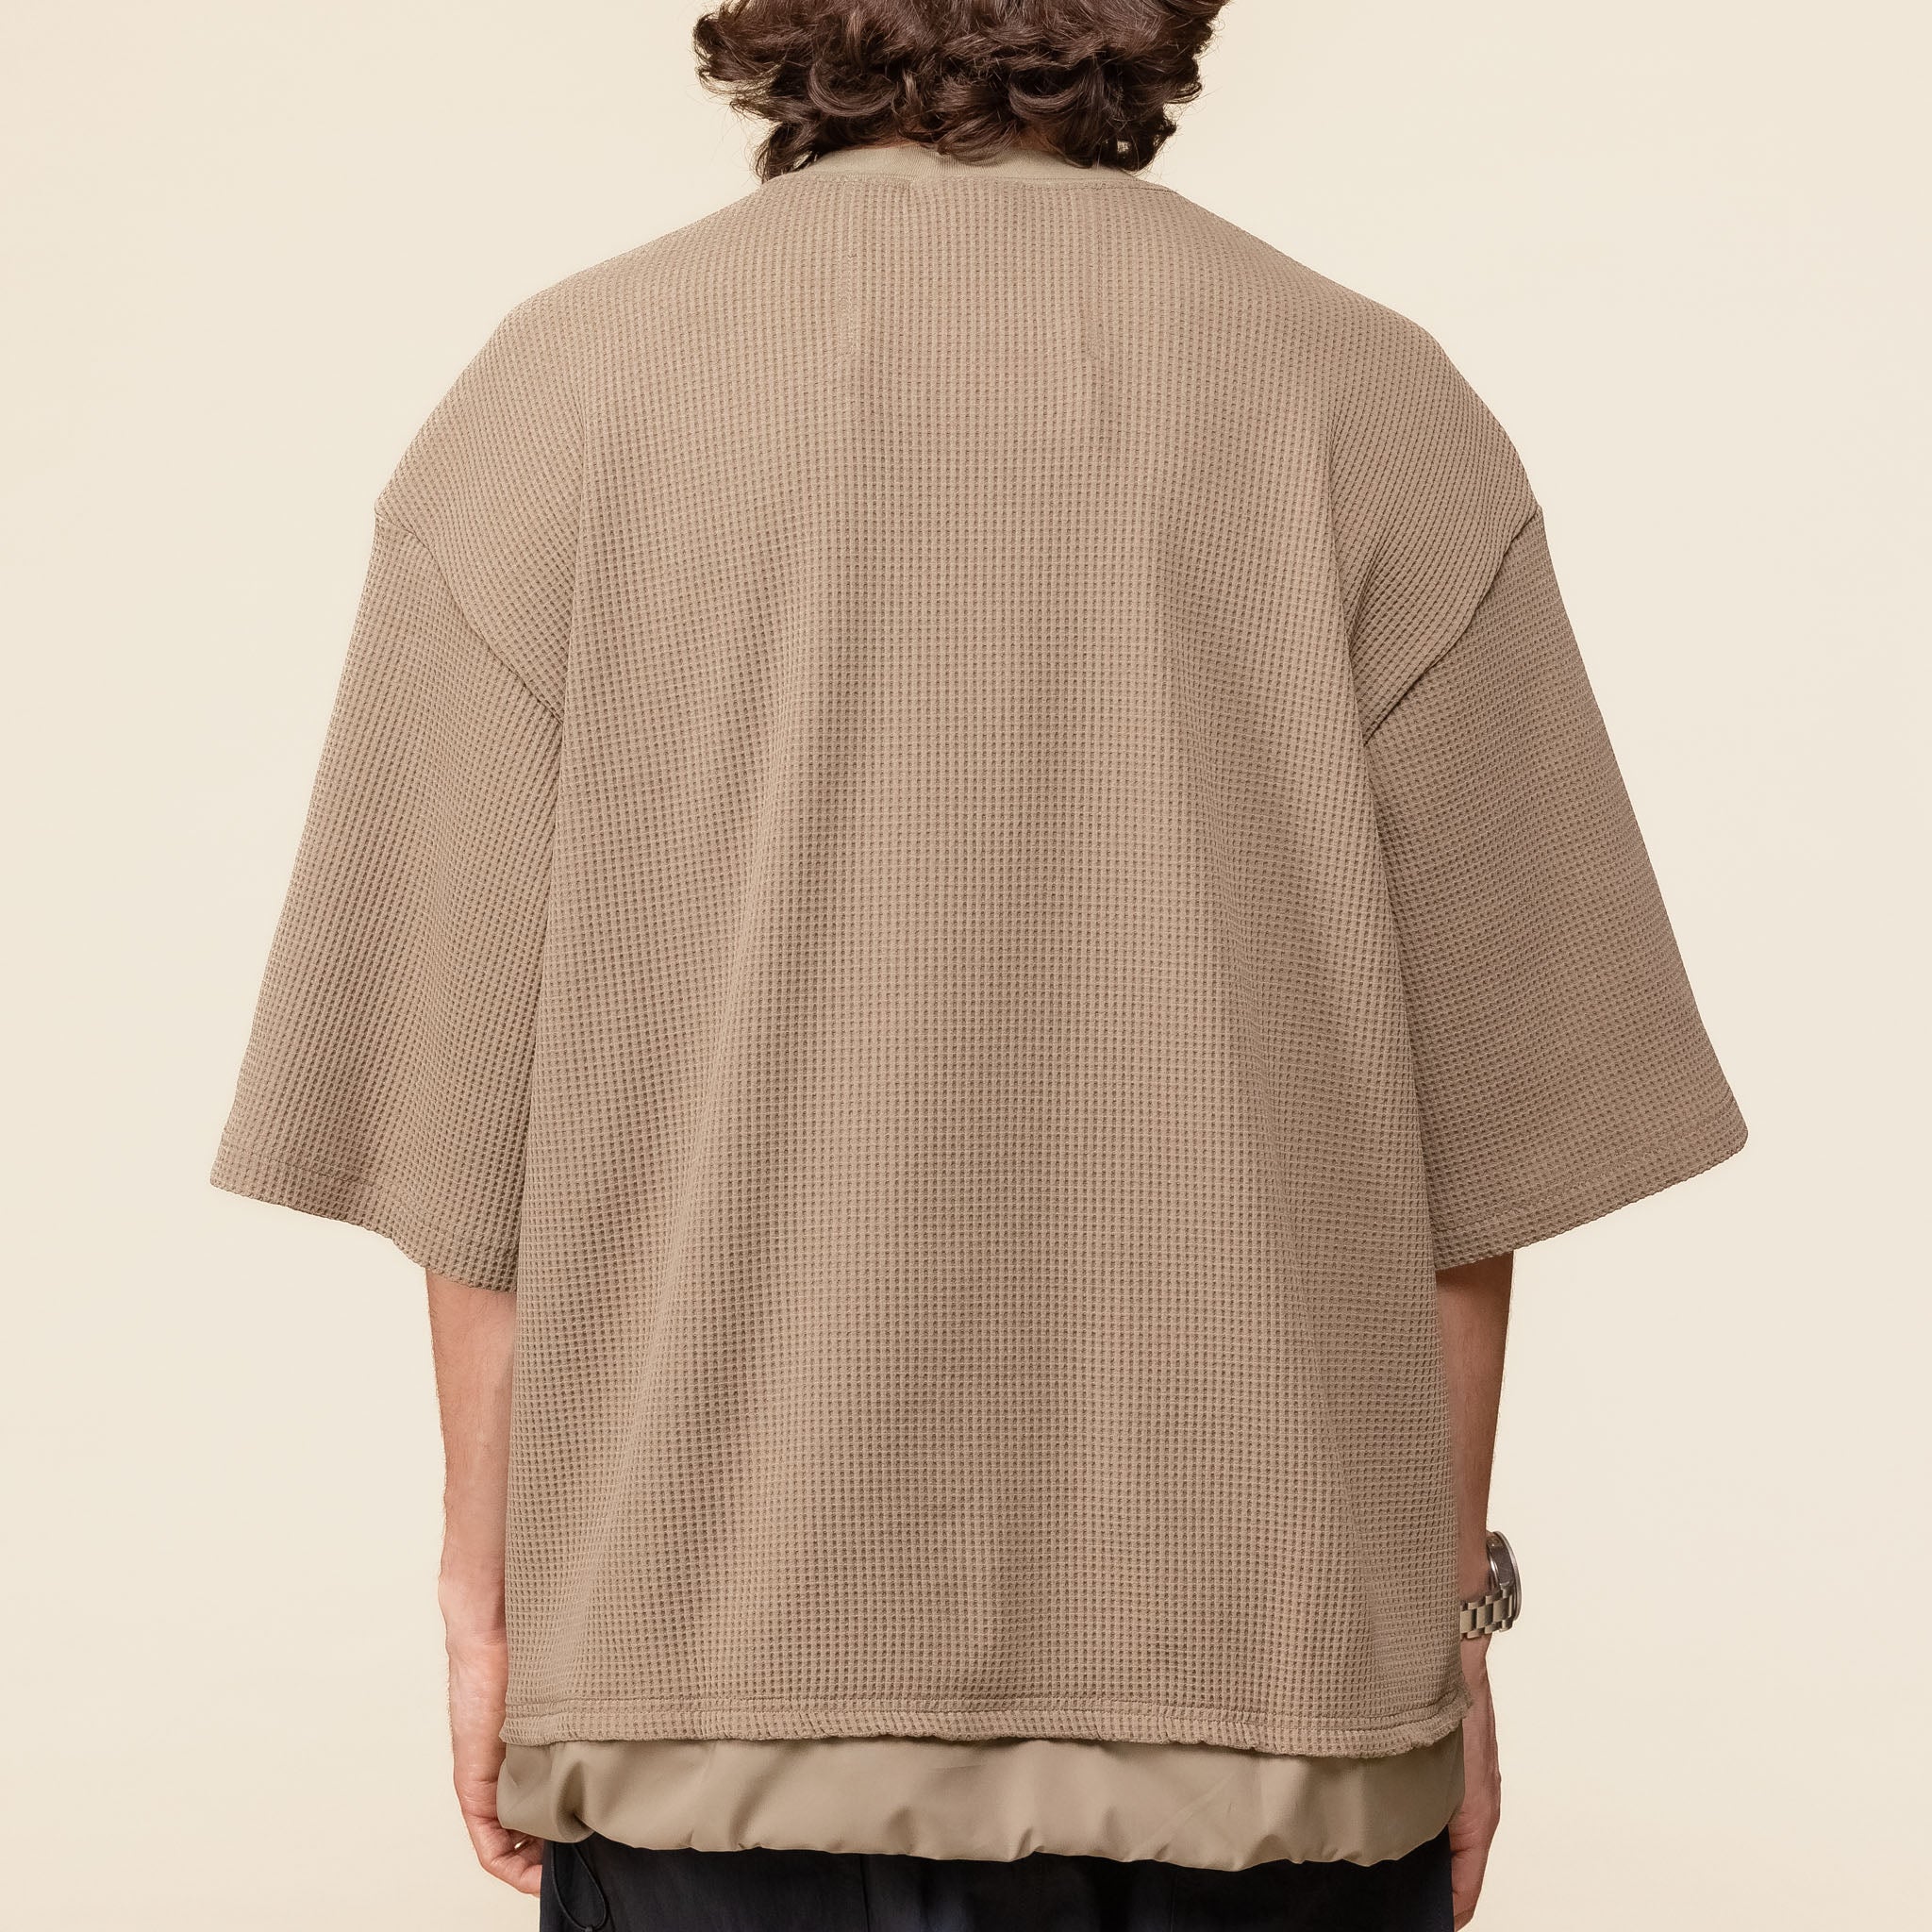 MW-CT24105 Meanswhile - SOLOTEX® Waffle T-Shirt - Bedouin (Brown)